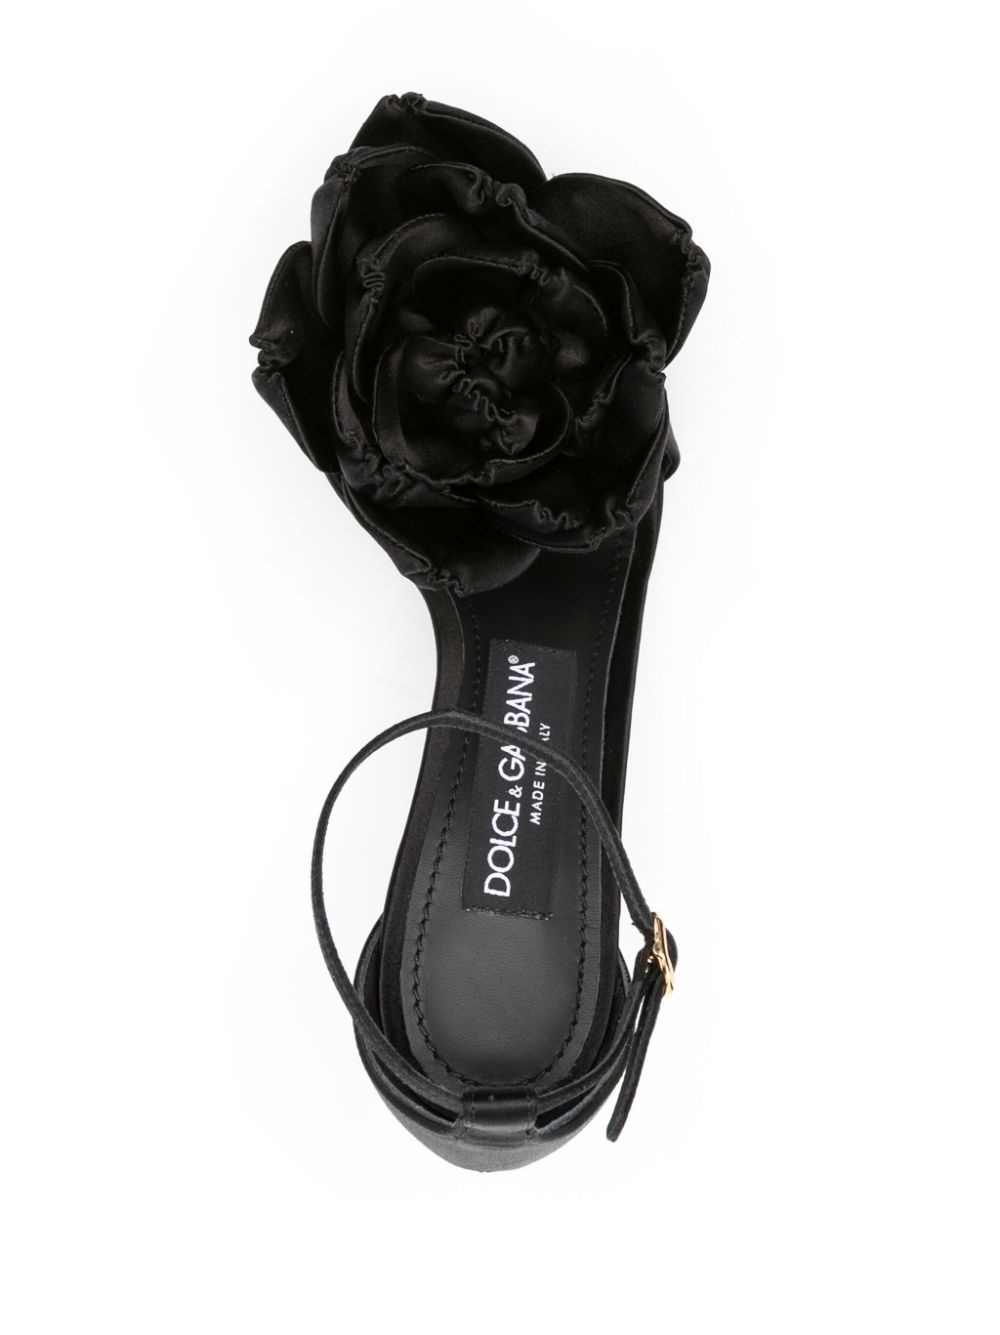 Shop Dolce & Gabbana Black Satin Heel Sandals With Floral Appliqué And Buckle Fastening Ankle Strap